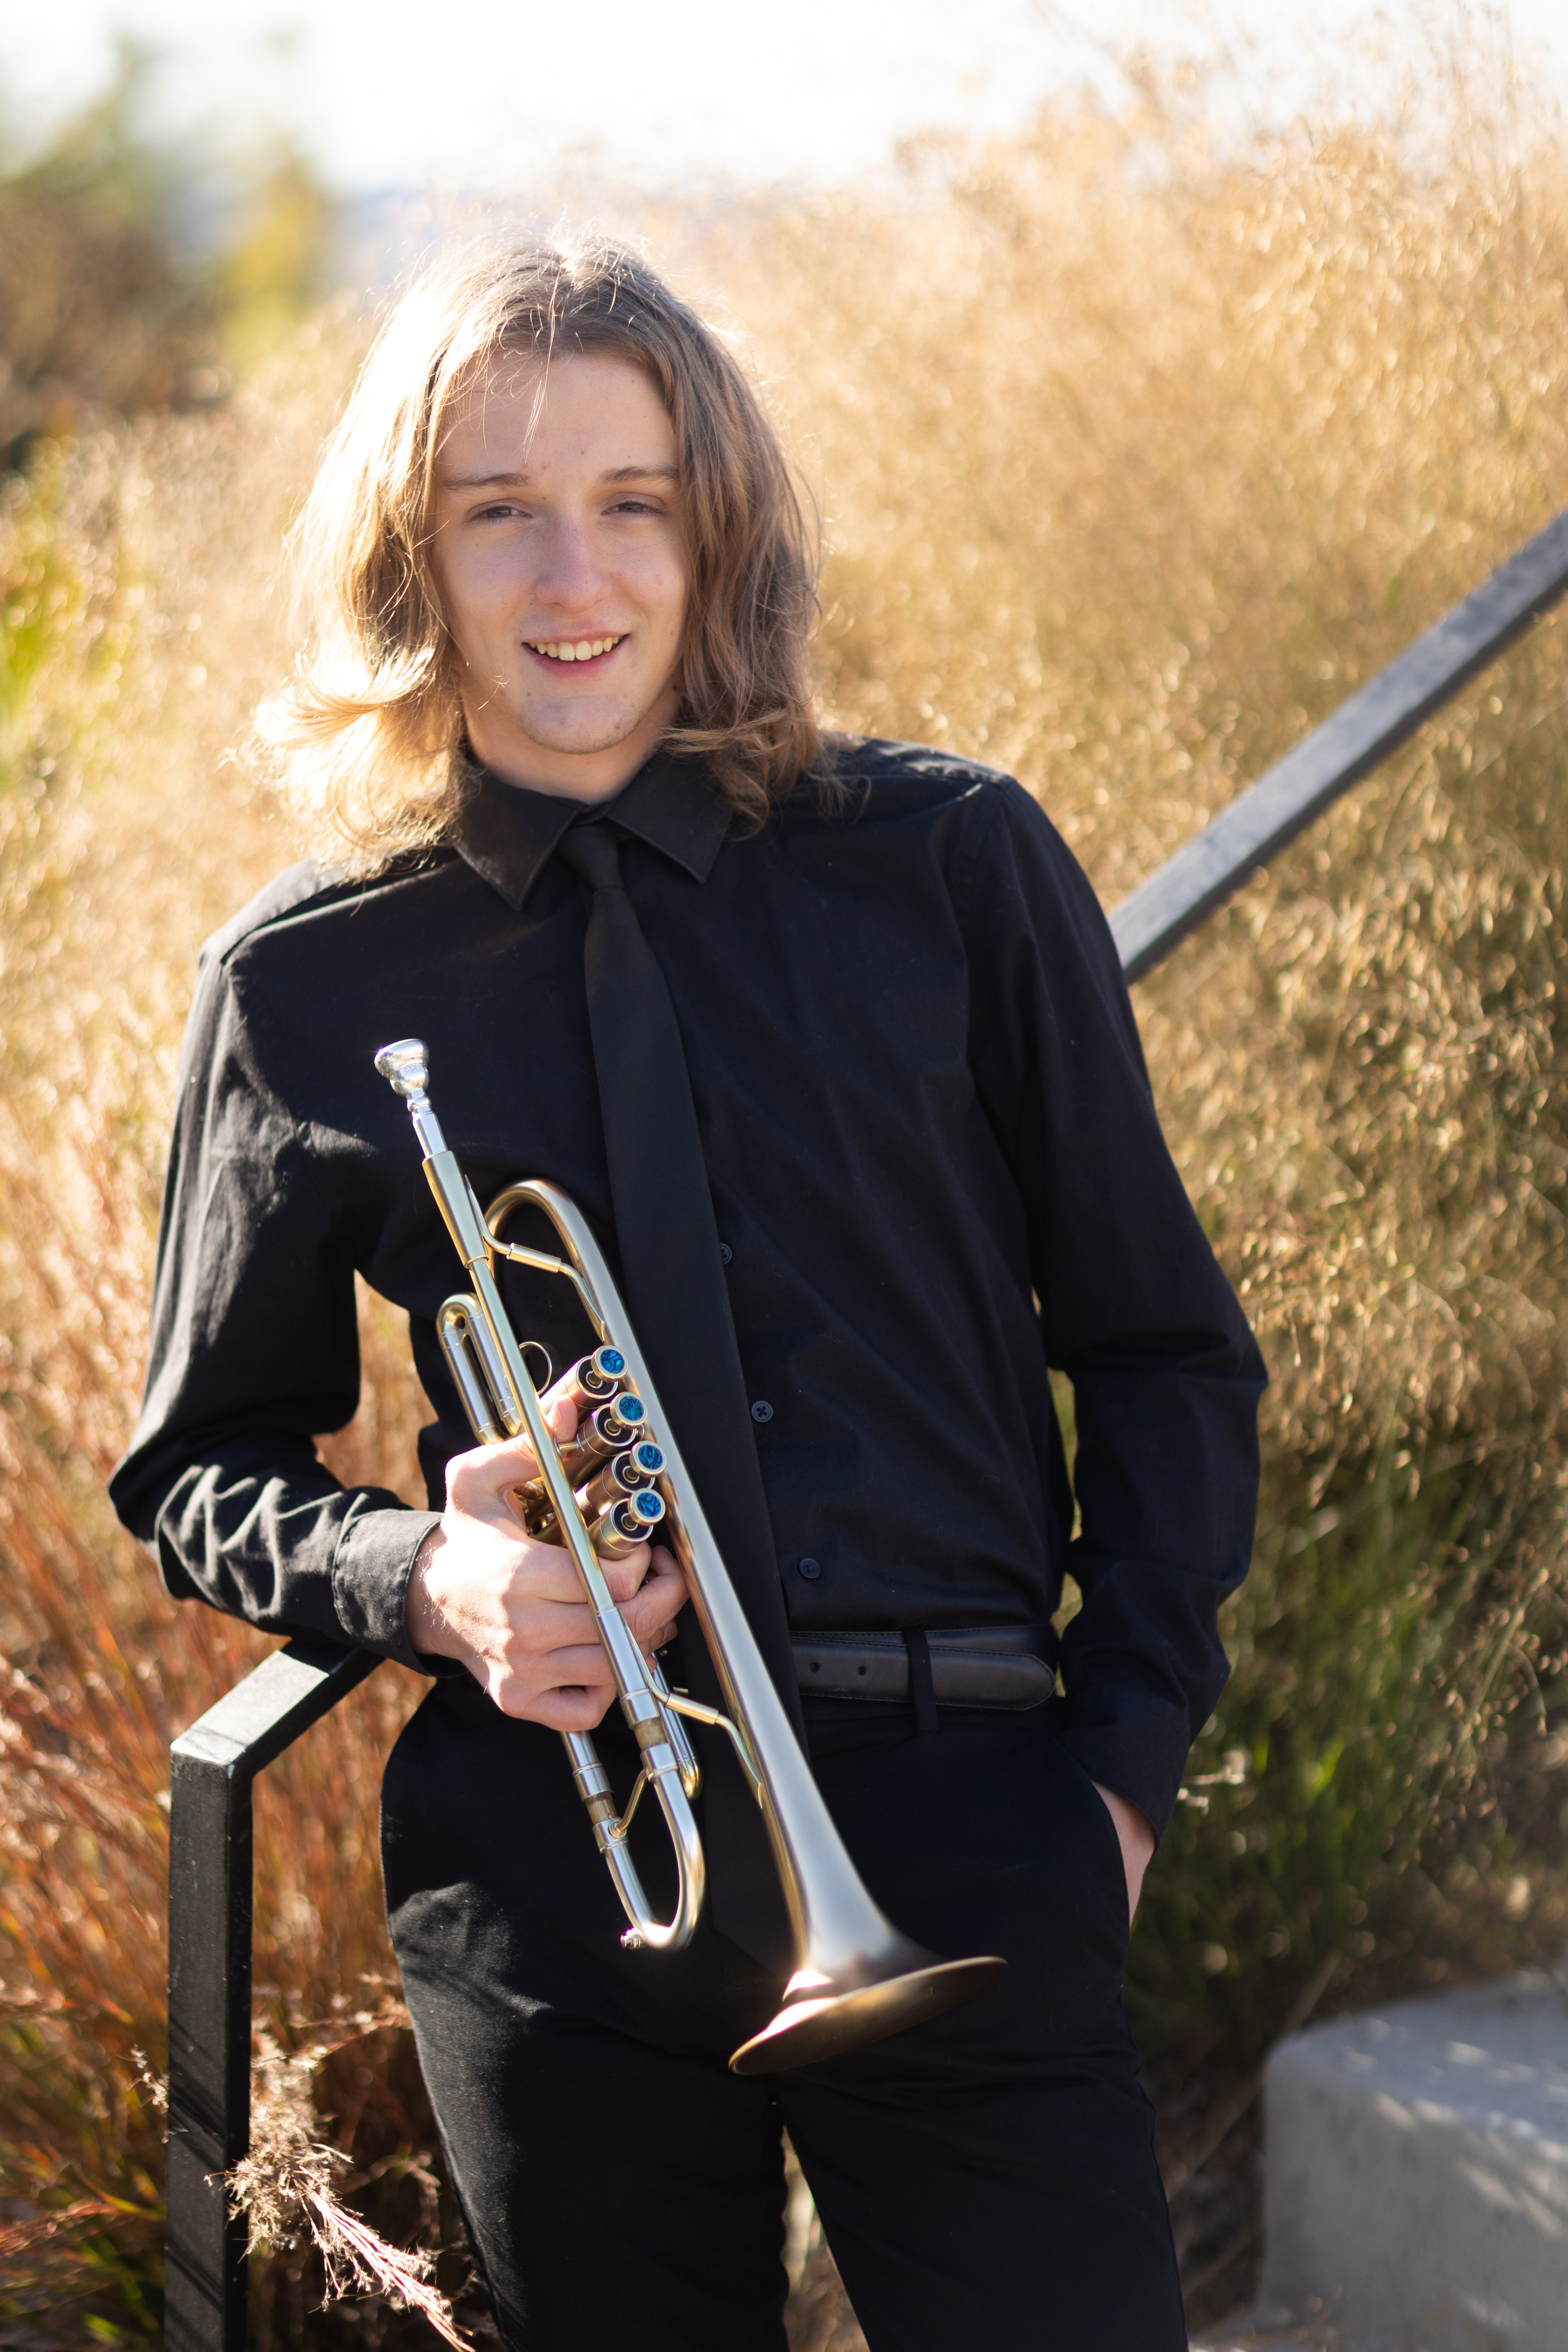 Photoshoot image with trumpet